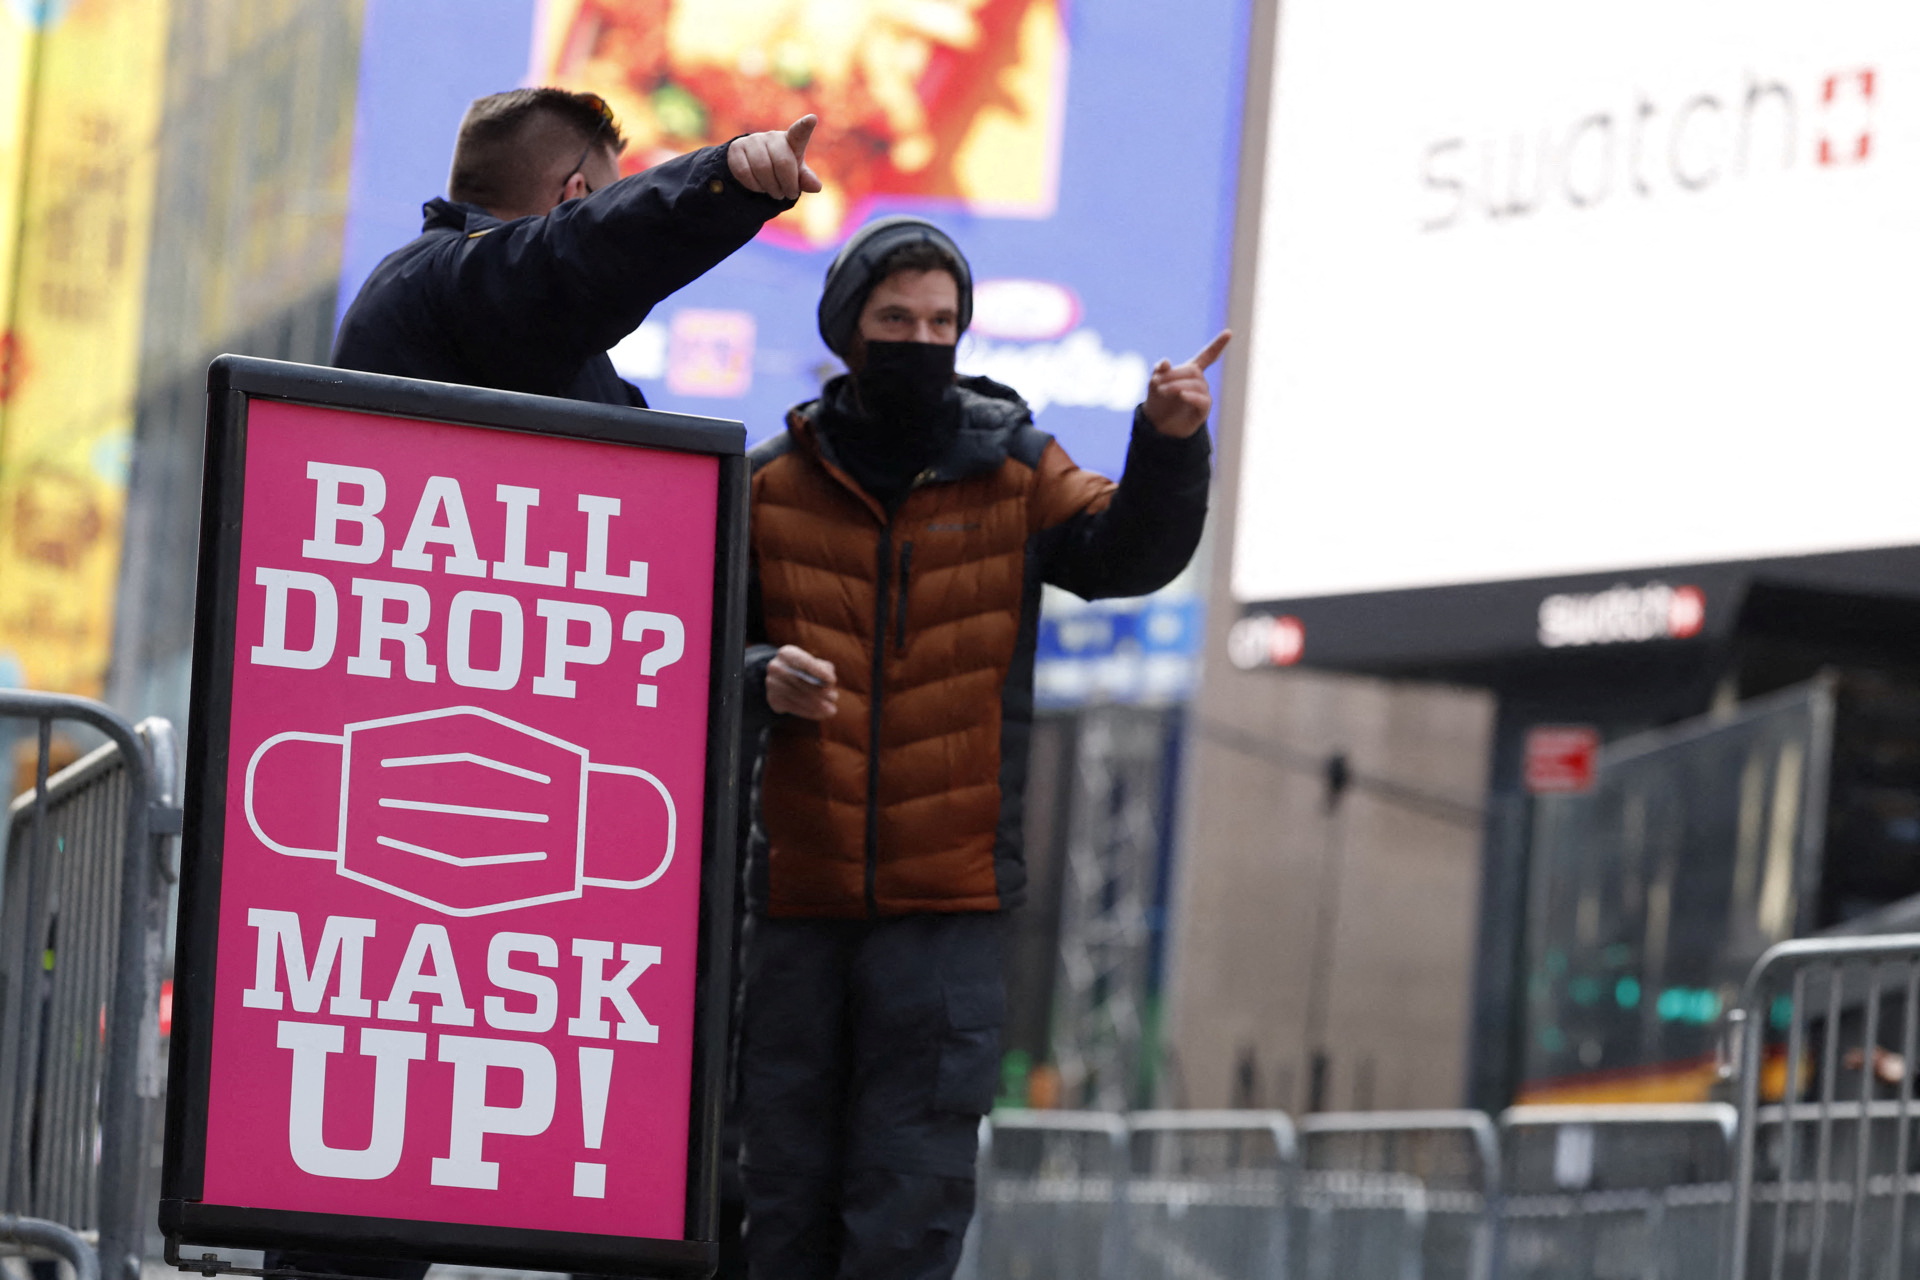 An officer from the New York City Police Department (NYPD) helps a person with directions while standing next to a signage encouraging people to wear masks ahead of New Year's Eve celebrations at Times Square as the Omicron variant continues to spread in the Manhattan borough of New York City, U.S., December 31, 2021. REUTERS/Stefan Jeremiah